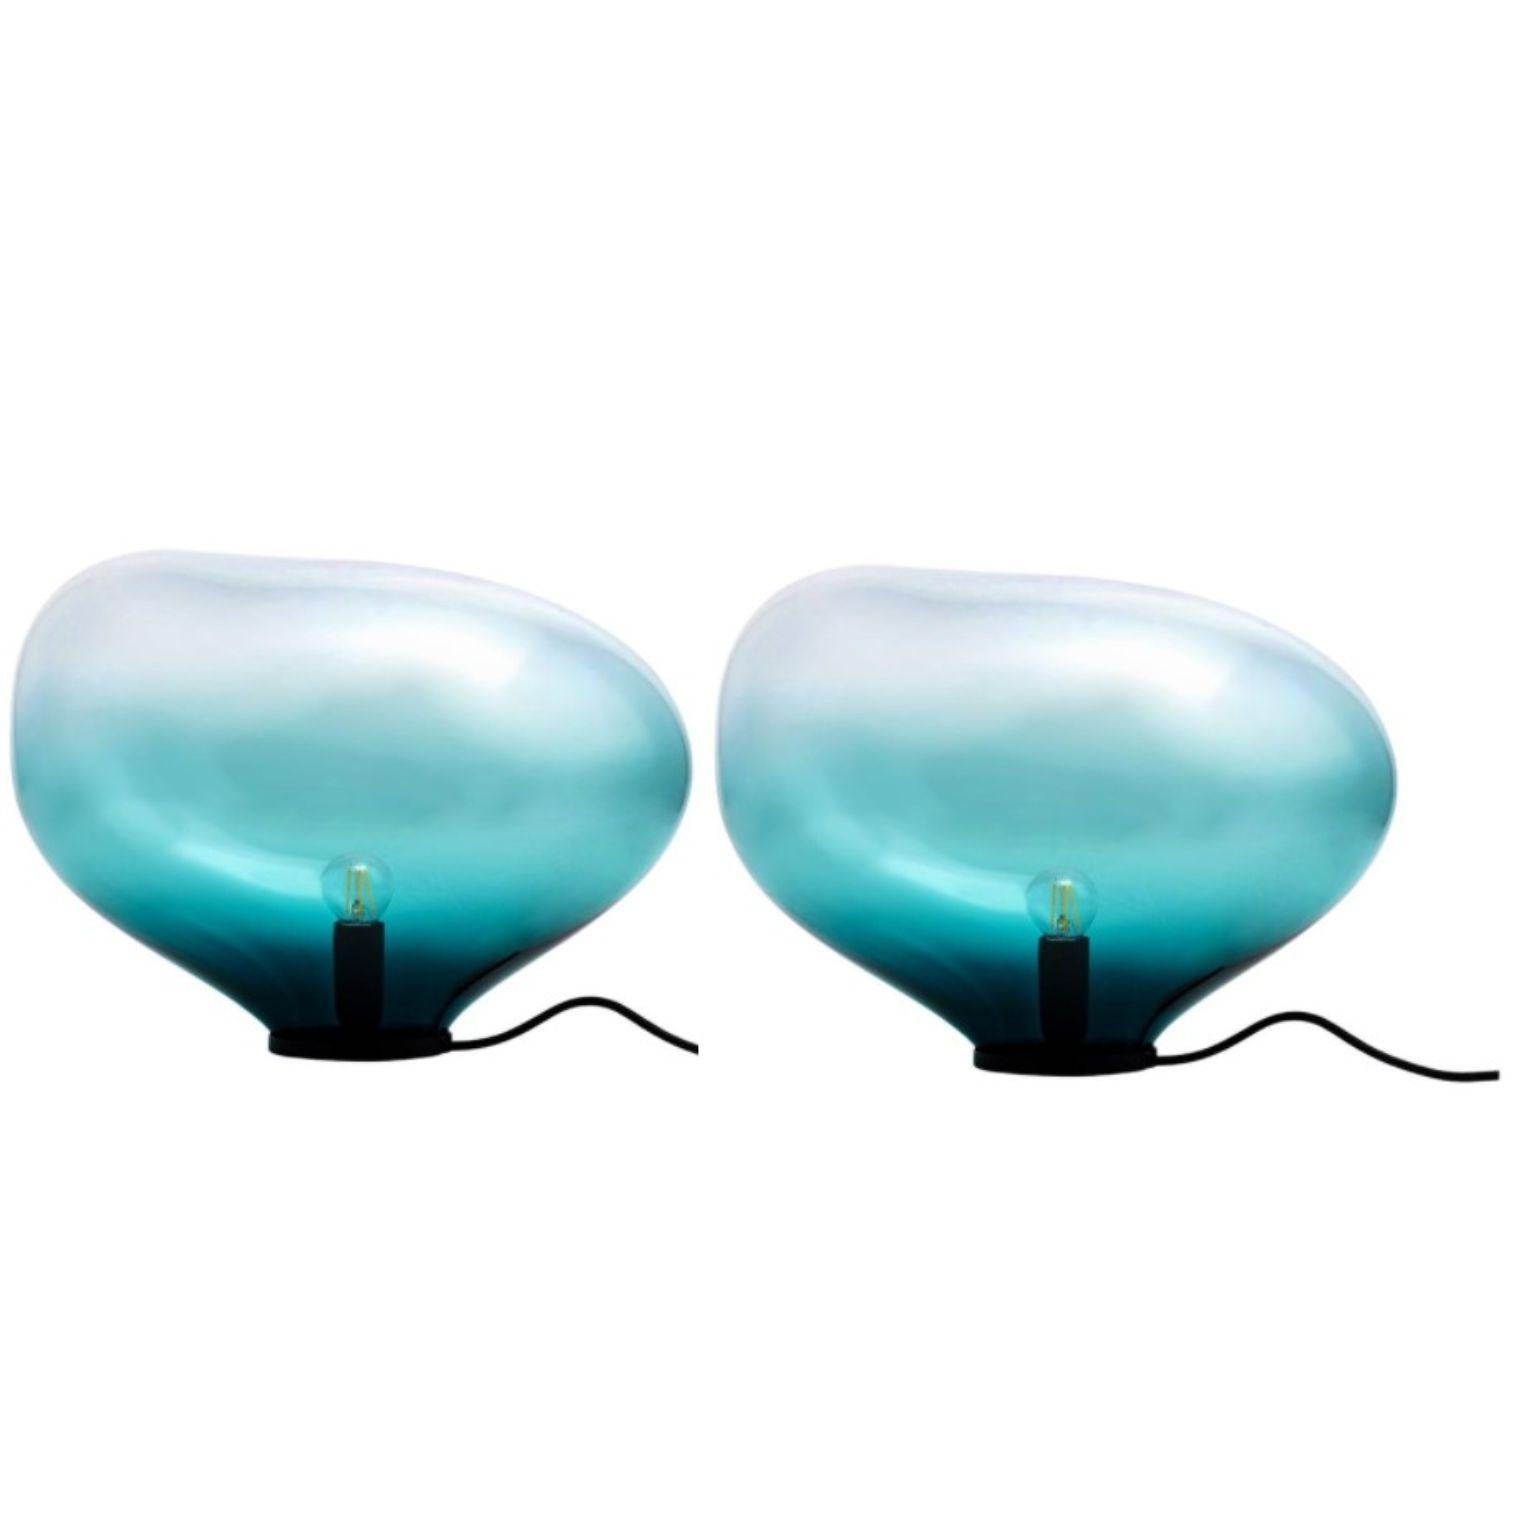 Set of 2 Sedna Petrol M Table Lamps by Eloa
No UL listed 
Material: Glass, steel, silver, LED Bulb
Dimensions: D 25 x W 38 x H 28 cm
Also available in different colours and dimensions.

All our lamps can be wired according to each country. If sold